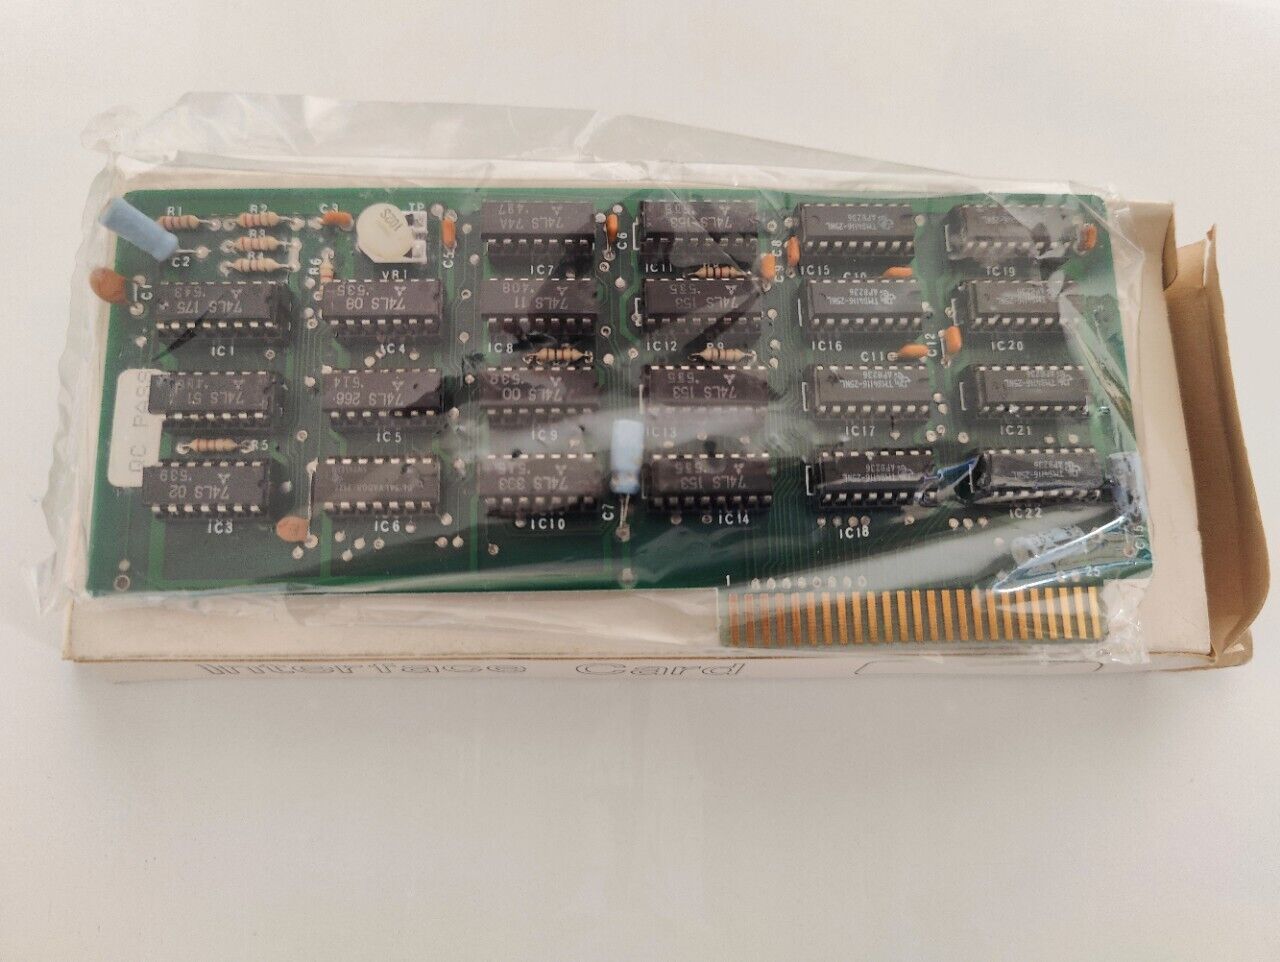 16 KB RAM Card for Apple II Family Computers